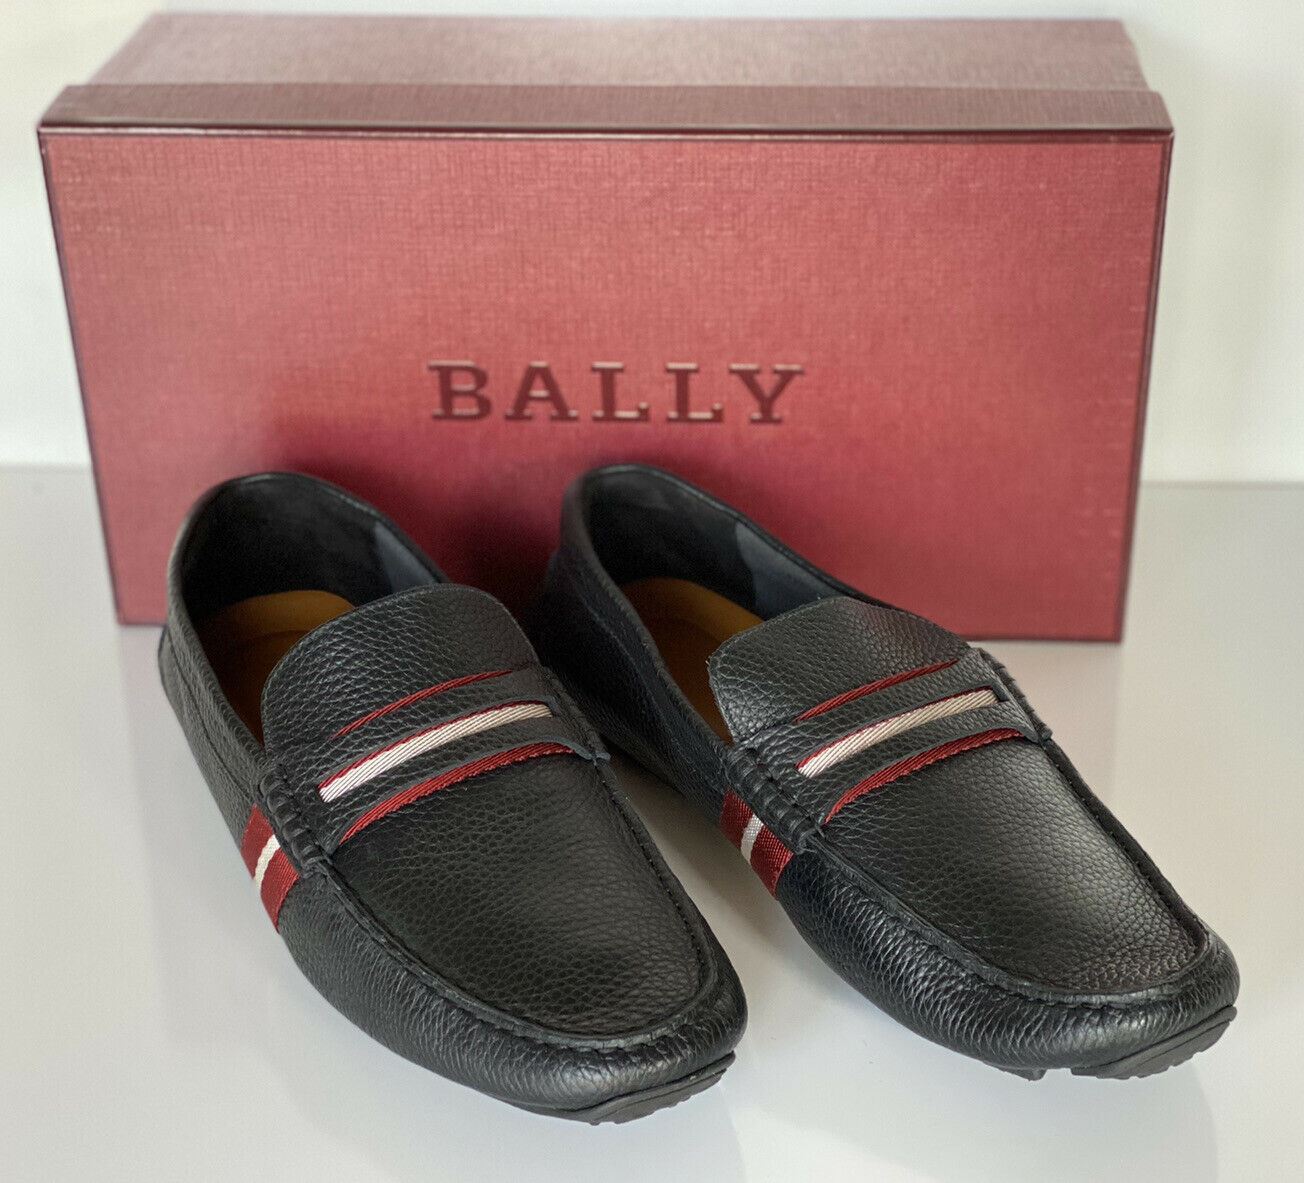 NIB Bally Mens Bovine Grained Leather Driver Shoes Black 11.5 D US 6228298 Italy